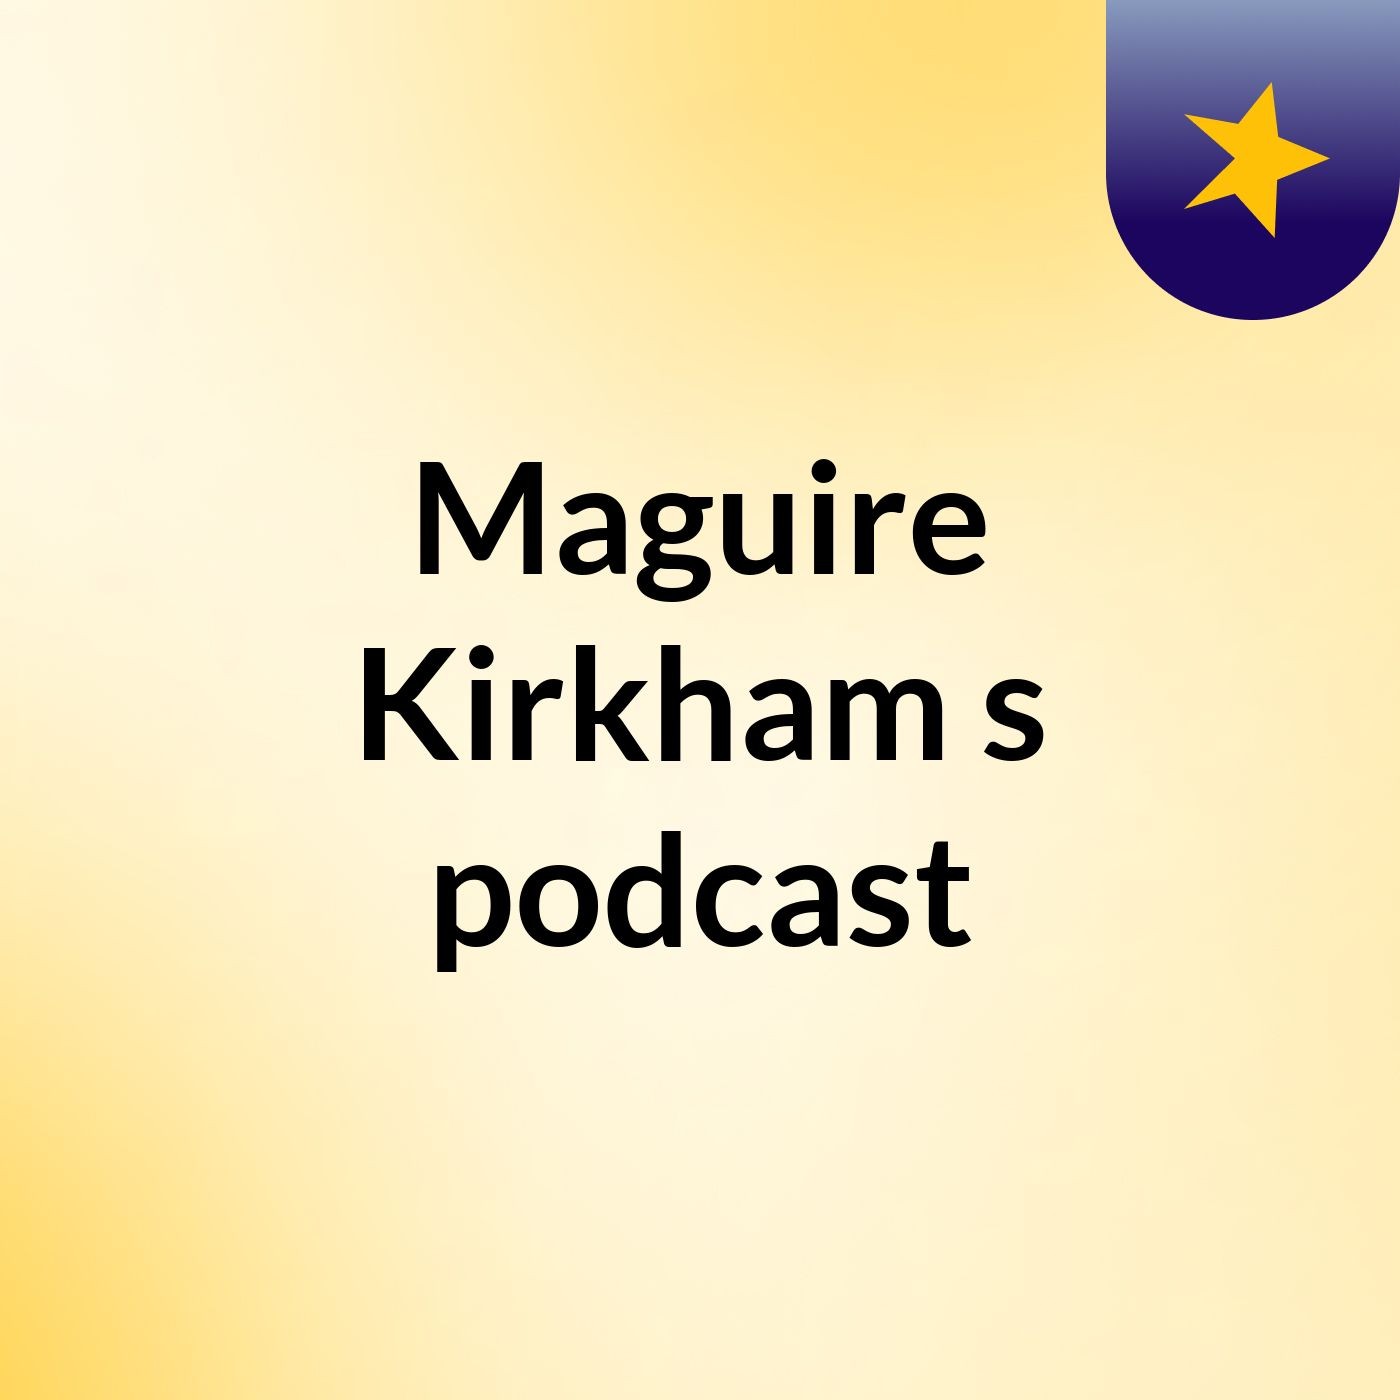 Maguire Kirkham's podcast